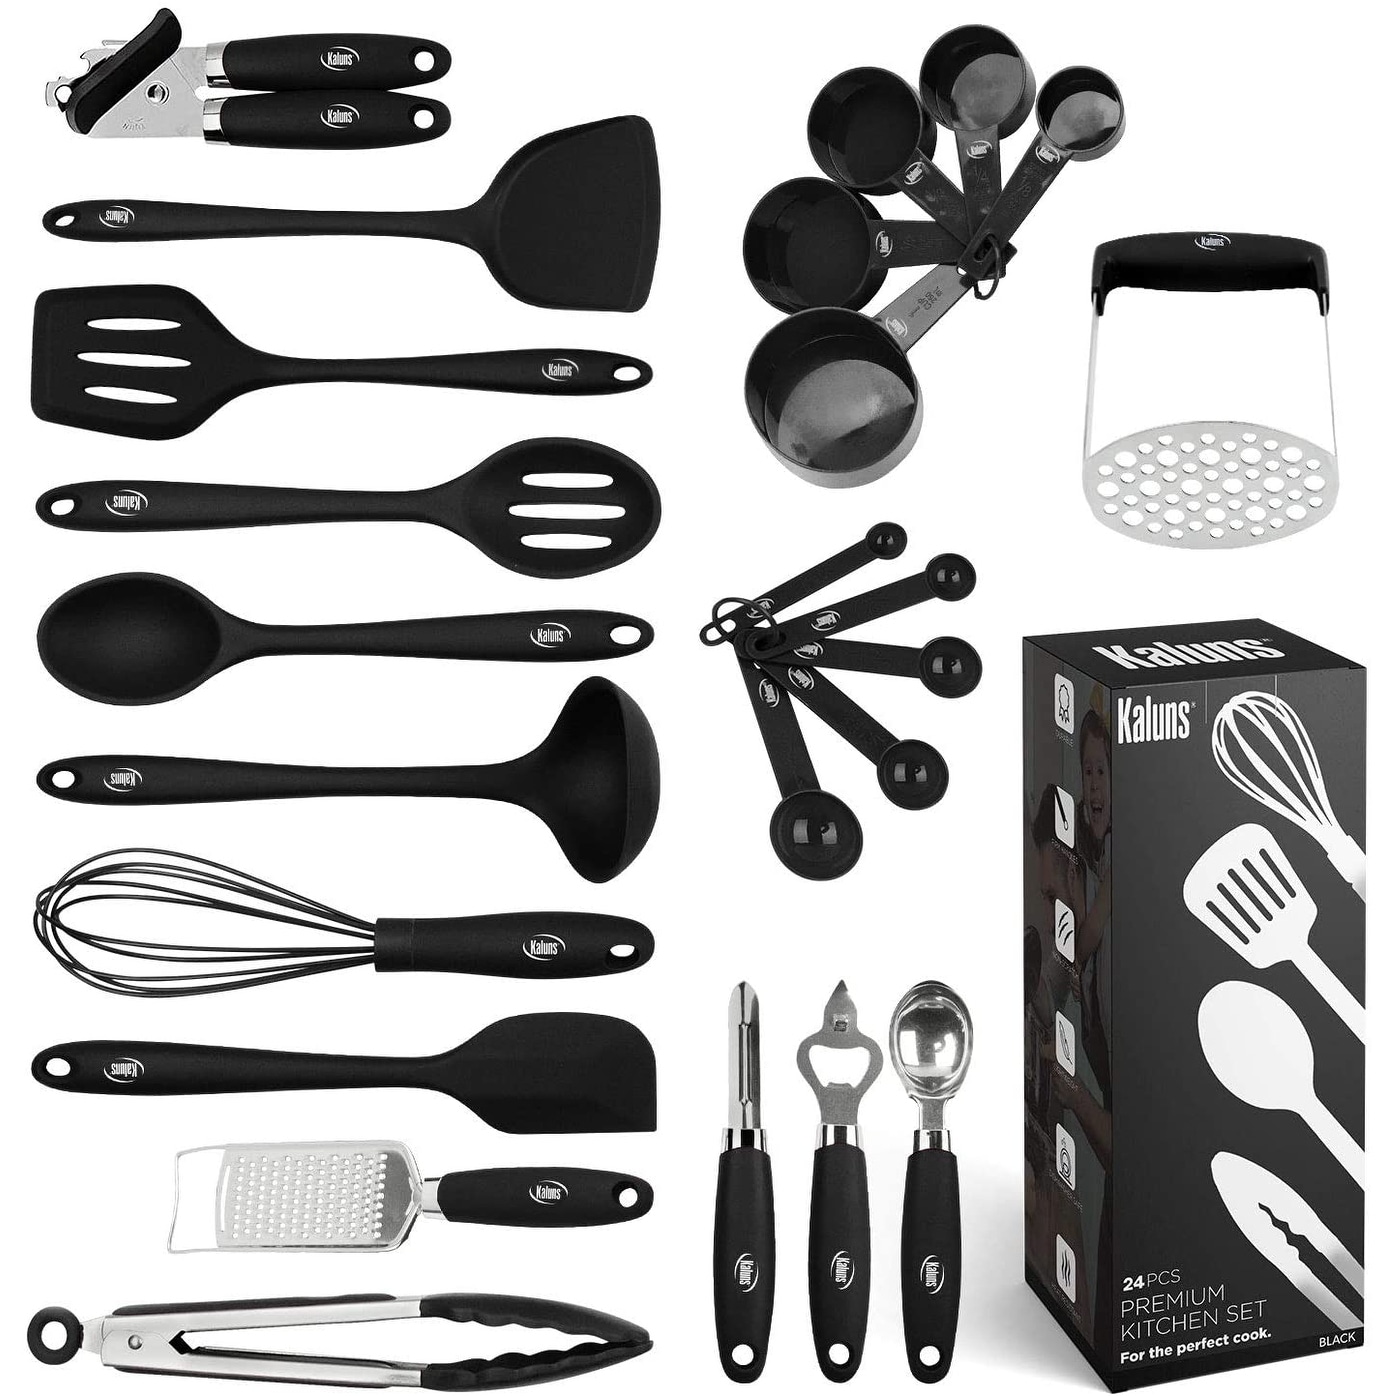 https://ak1.ostkcdn.com/images/products/is/images/direct/9076ce03aecc7277782847d0eba1eab4157c285b/Cooking-Utensil-set%2C-24-piece-Silicone-Kitchen-Tools.jpg